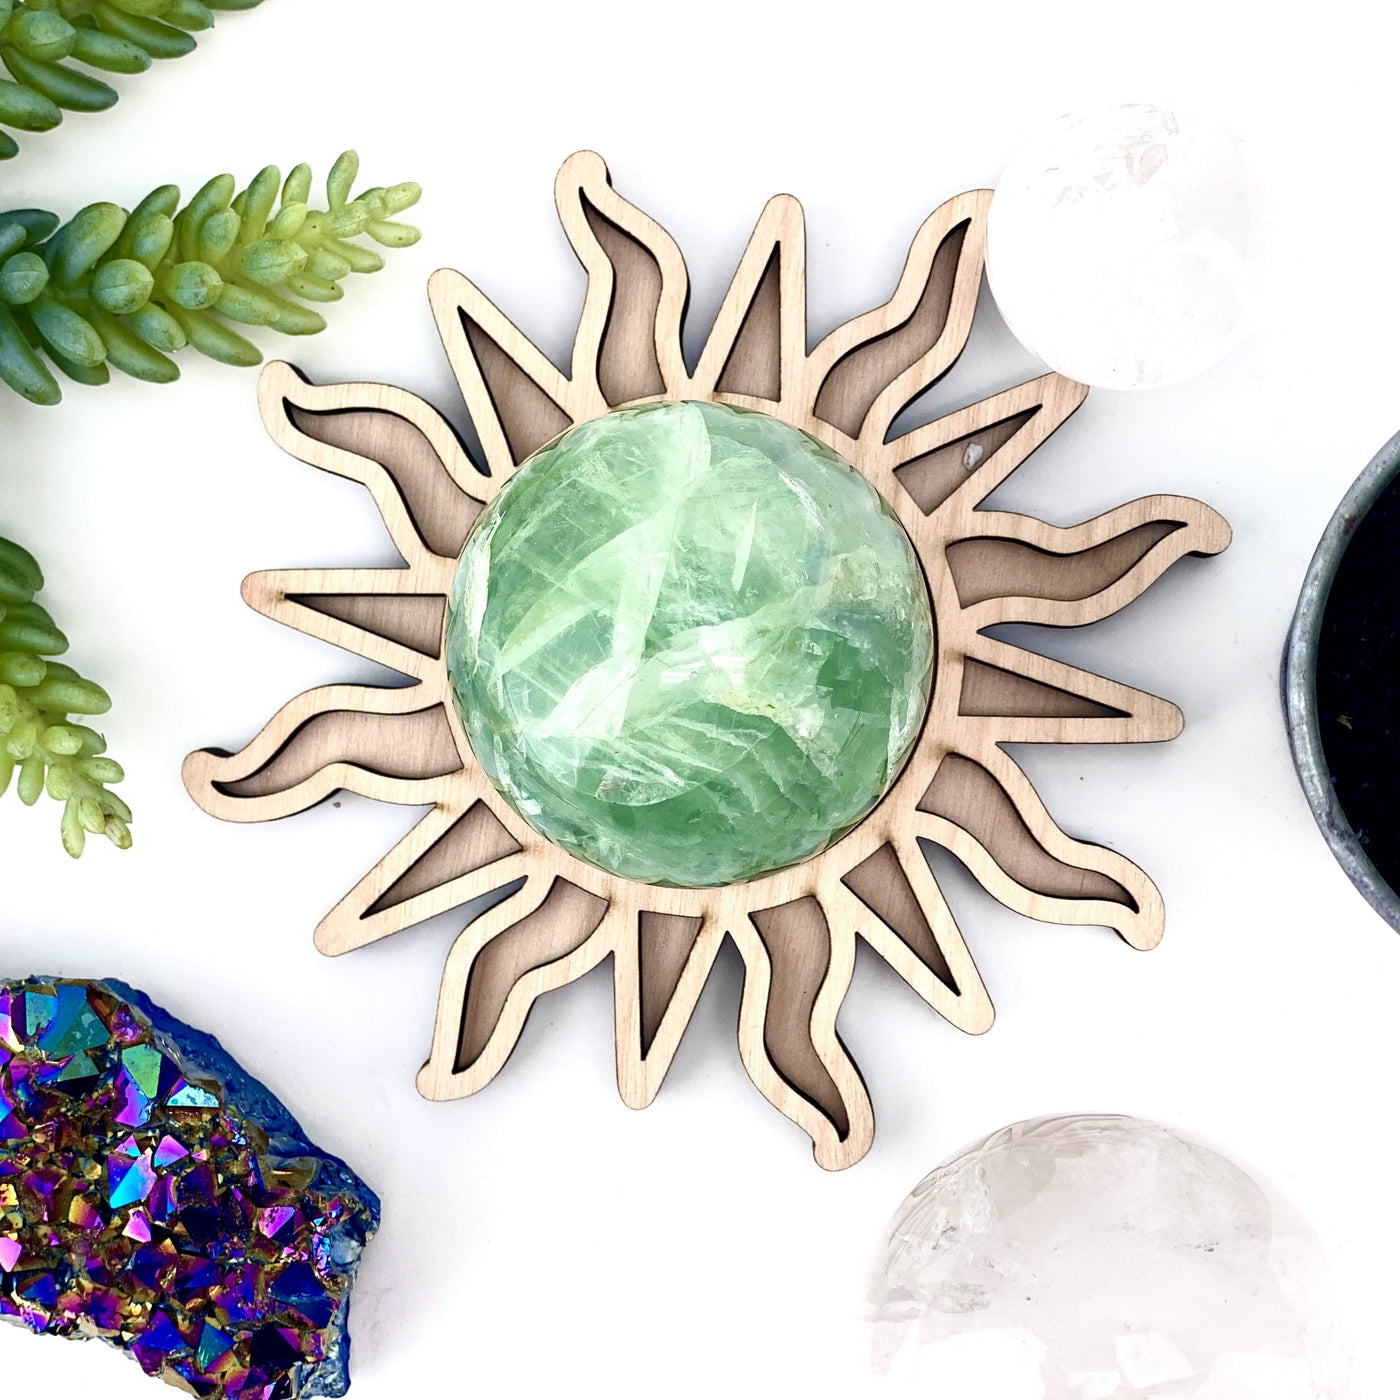 Wooden sun shaped sphere holder with a green fluorite sphere on it as an example of how it can be used.